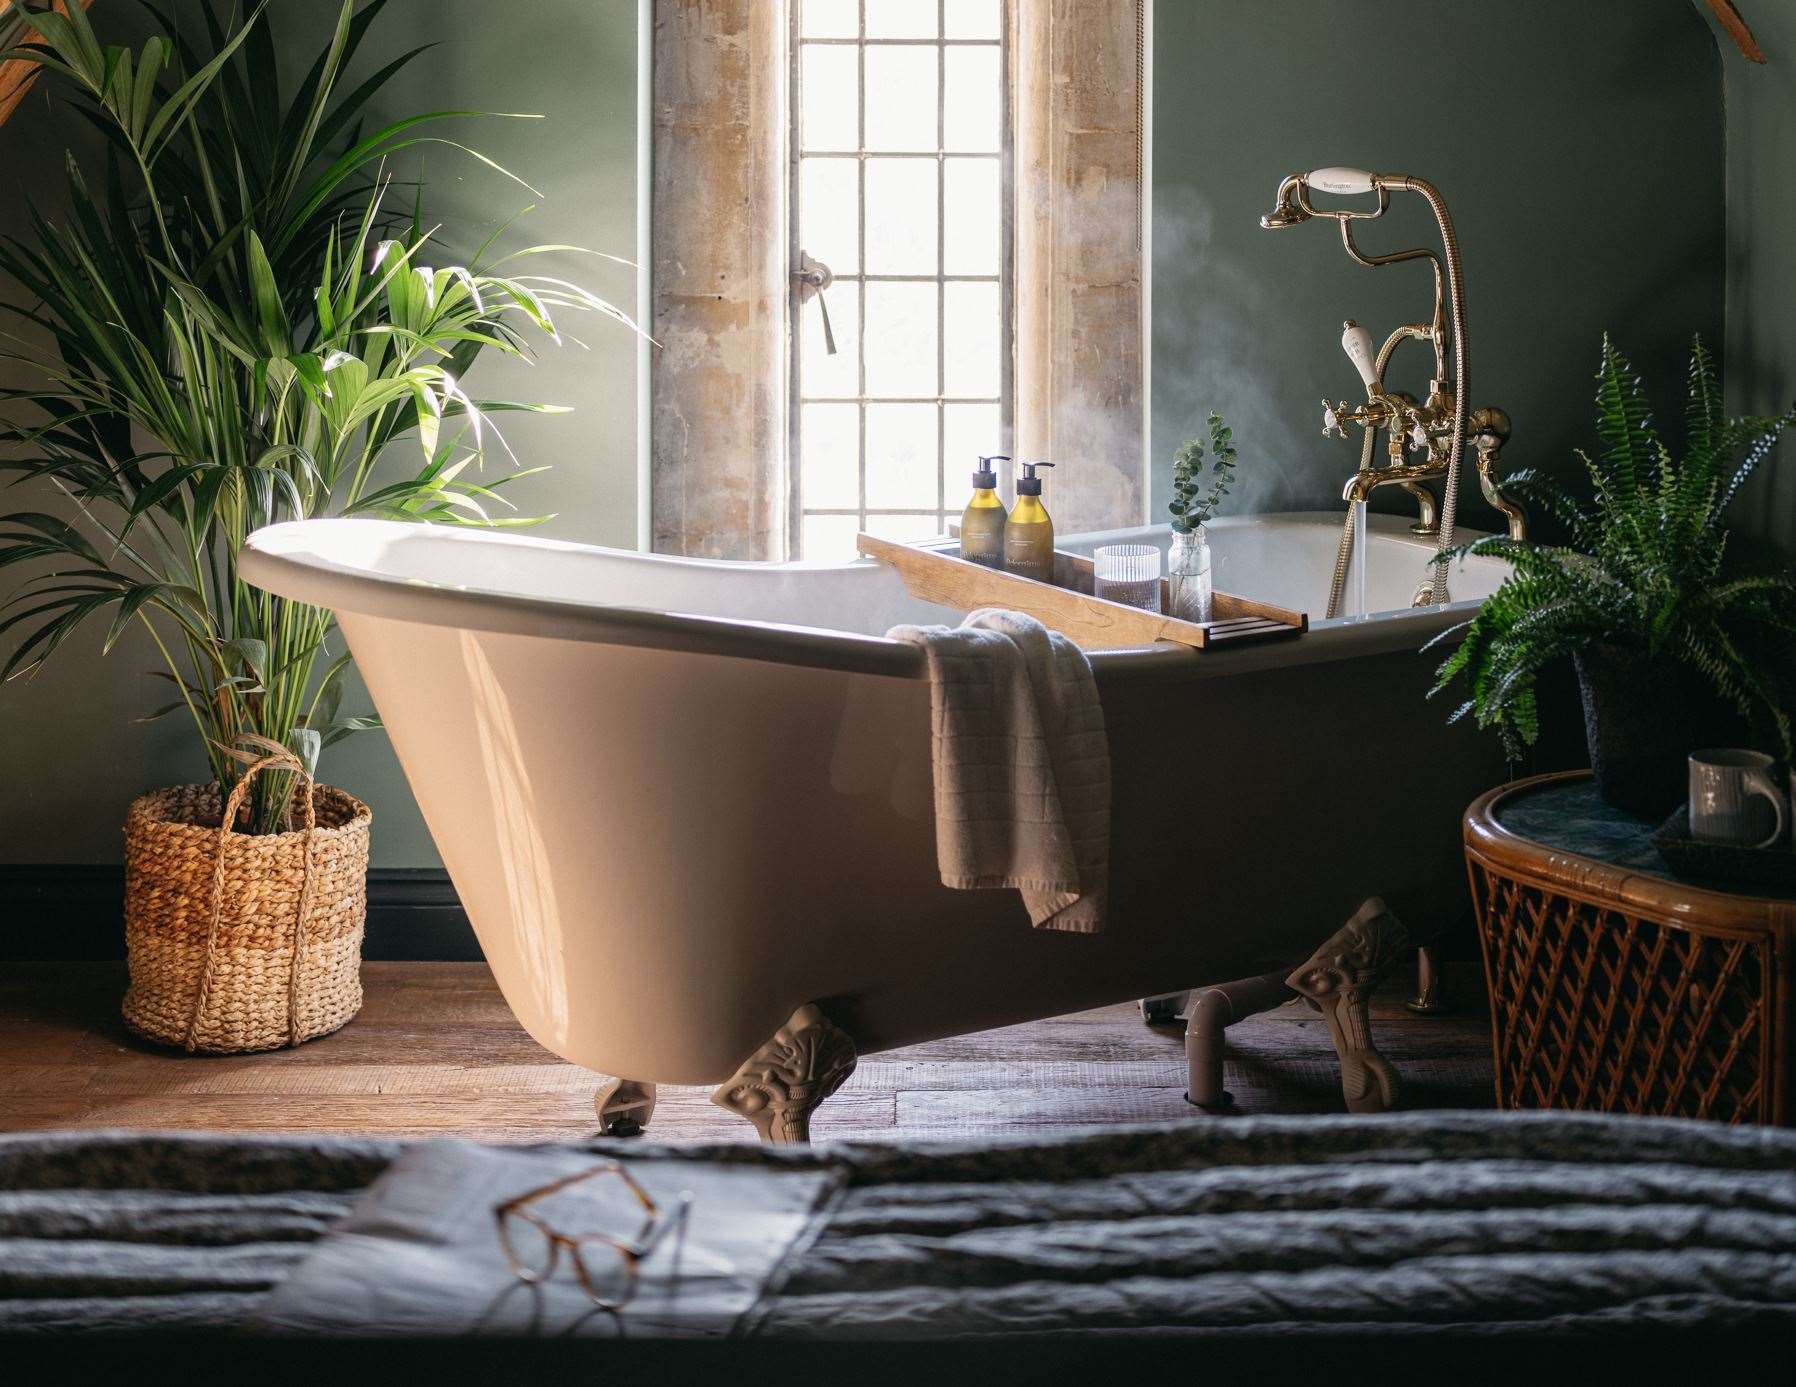 Some of the rooms have roll-top baths. Picture: Mark Anthony Fox